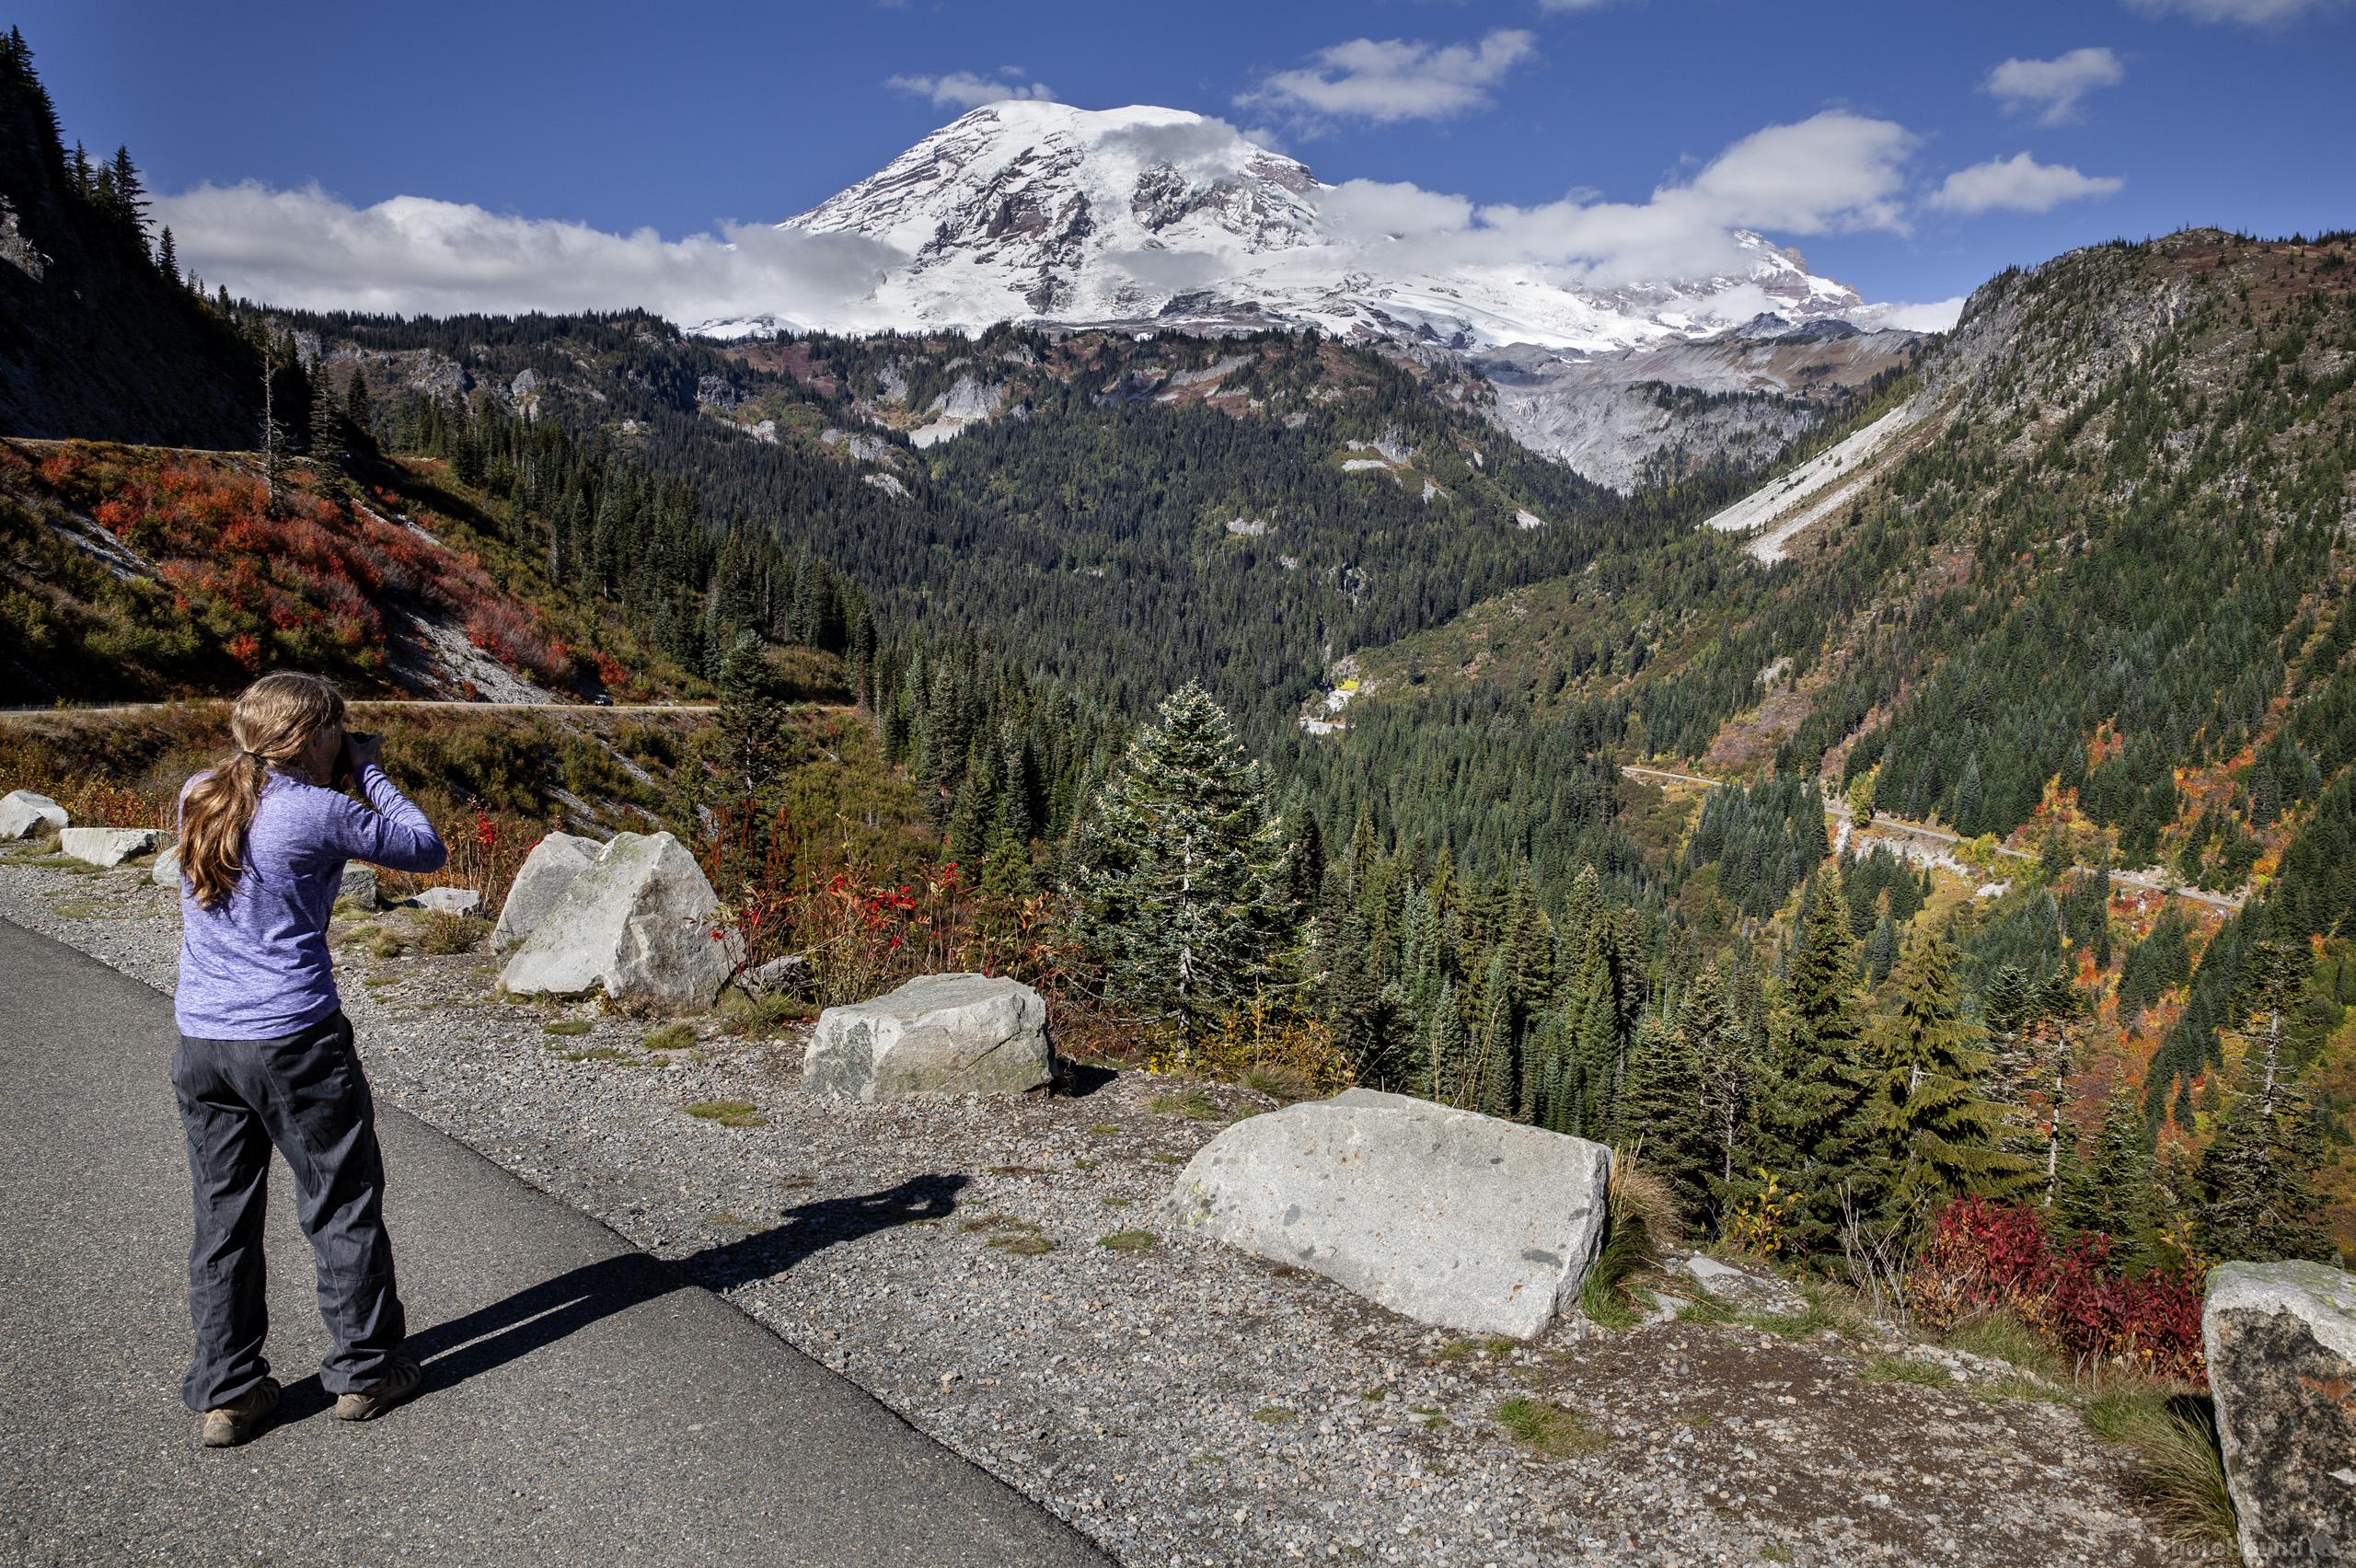 Image of Stevens Canyon Bend Viewpoint, Mount Rainier National Park by T. Kirkendall and V. Spring